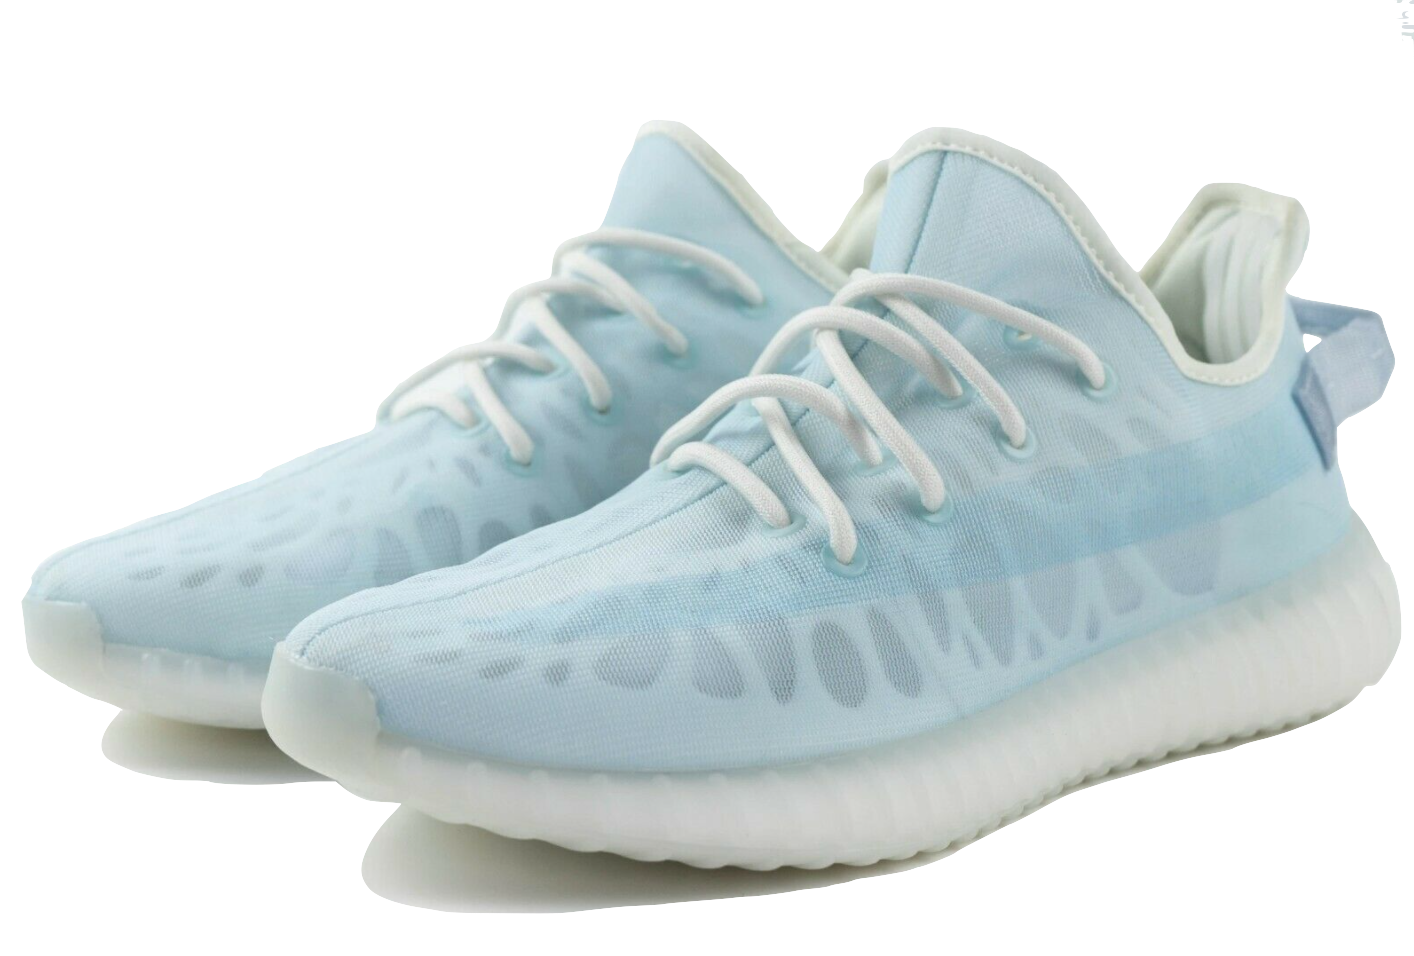 Best Shoe Deals: How to Buy The adidas Yeezy Boost 350 v2 Mono Ice ...